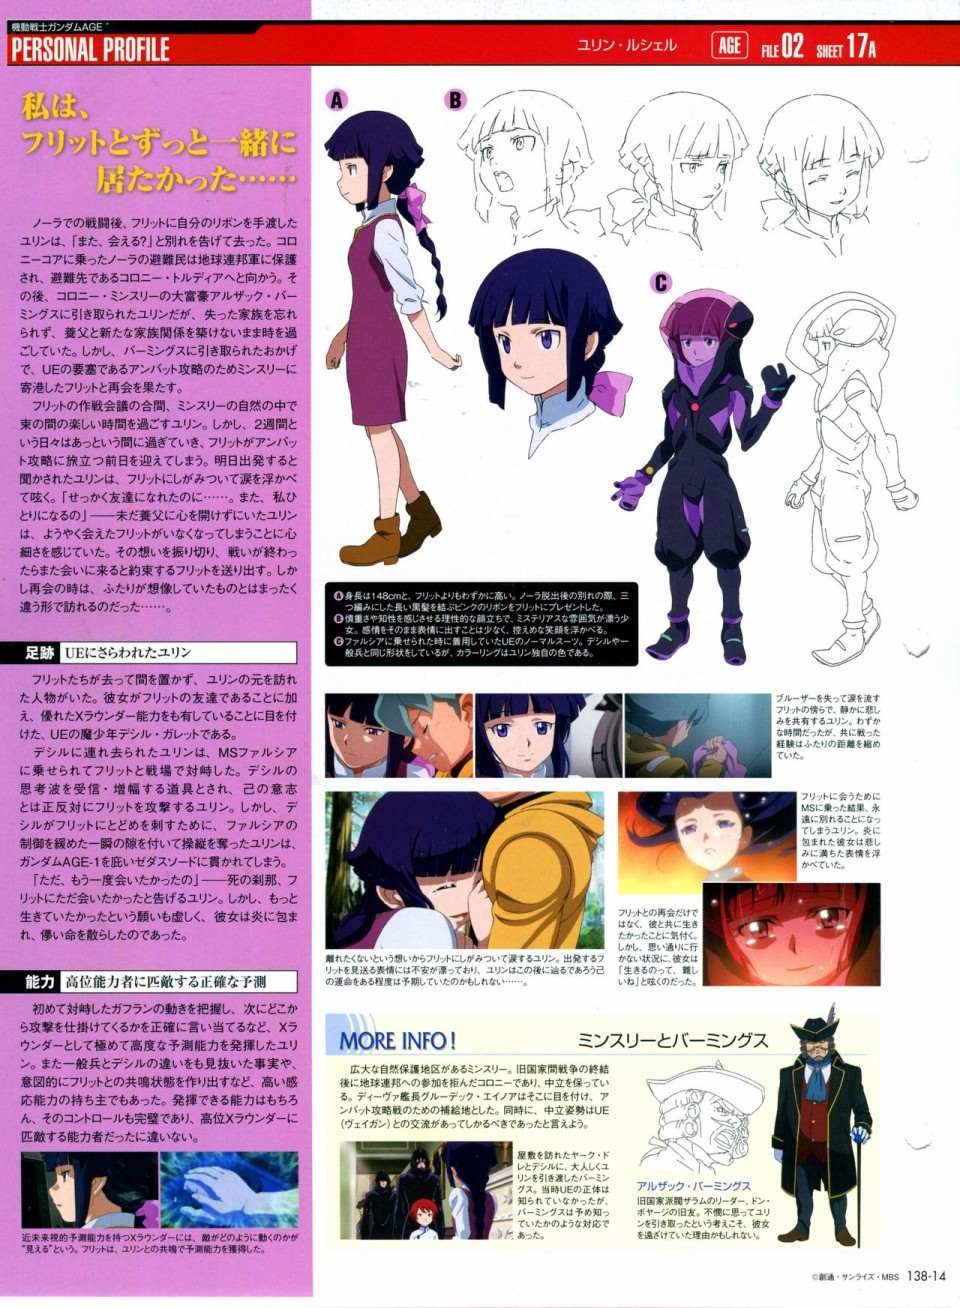 The Official Gundam Perfect File  - 第138話 - 6